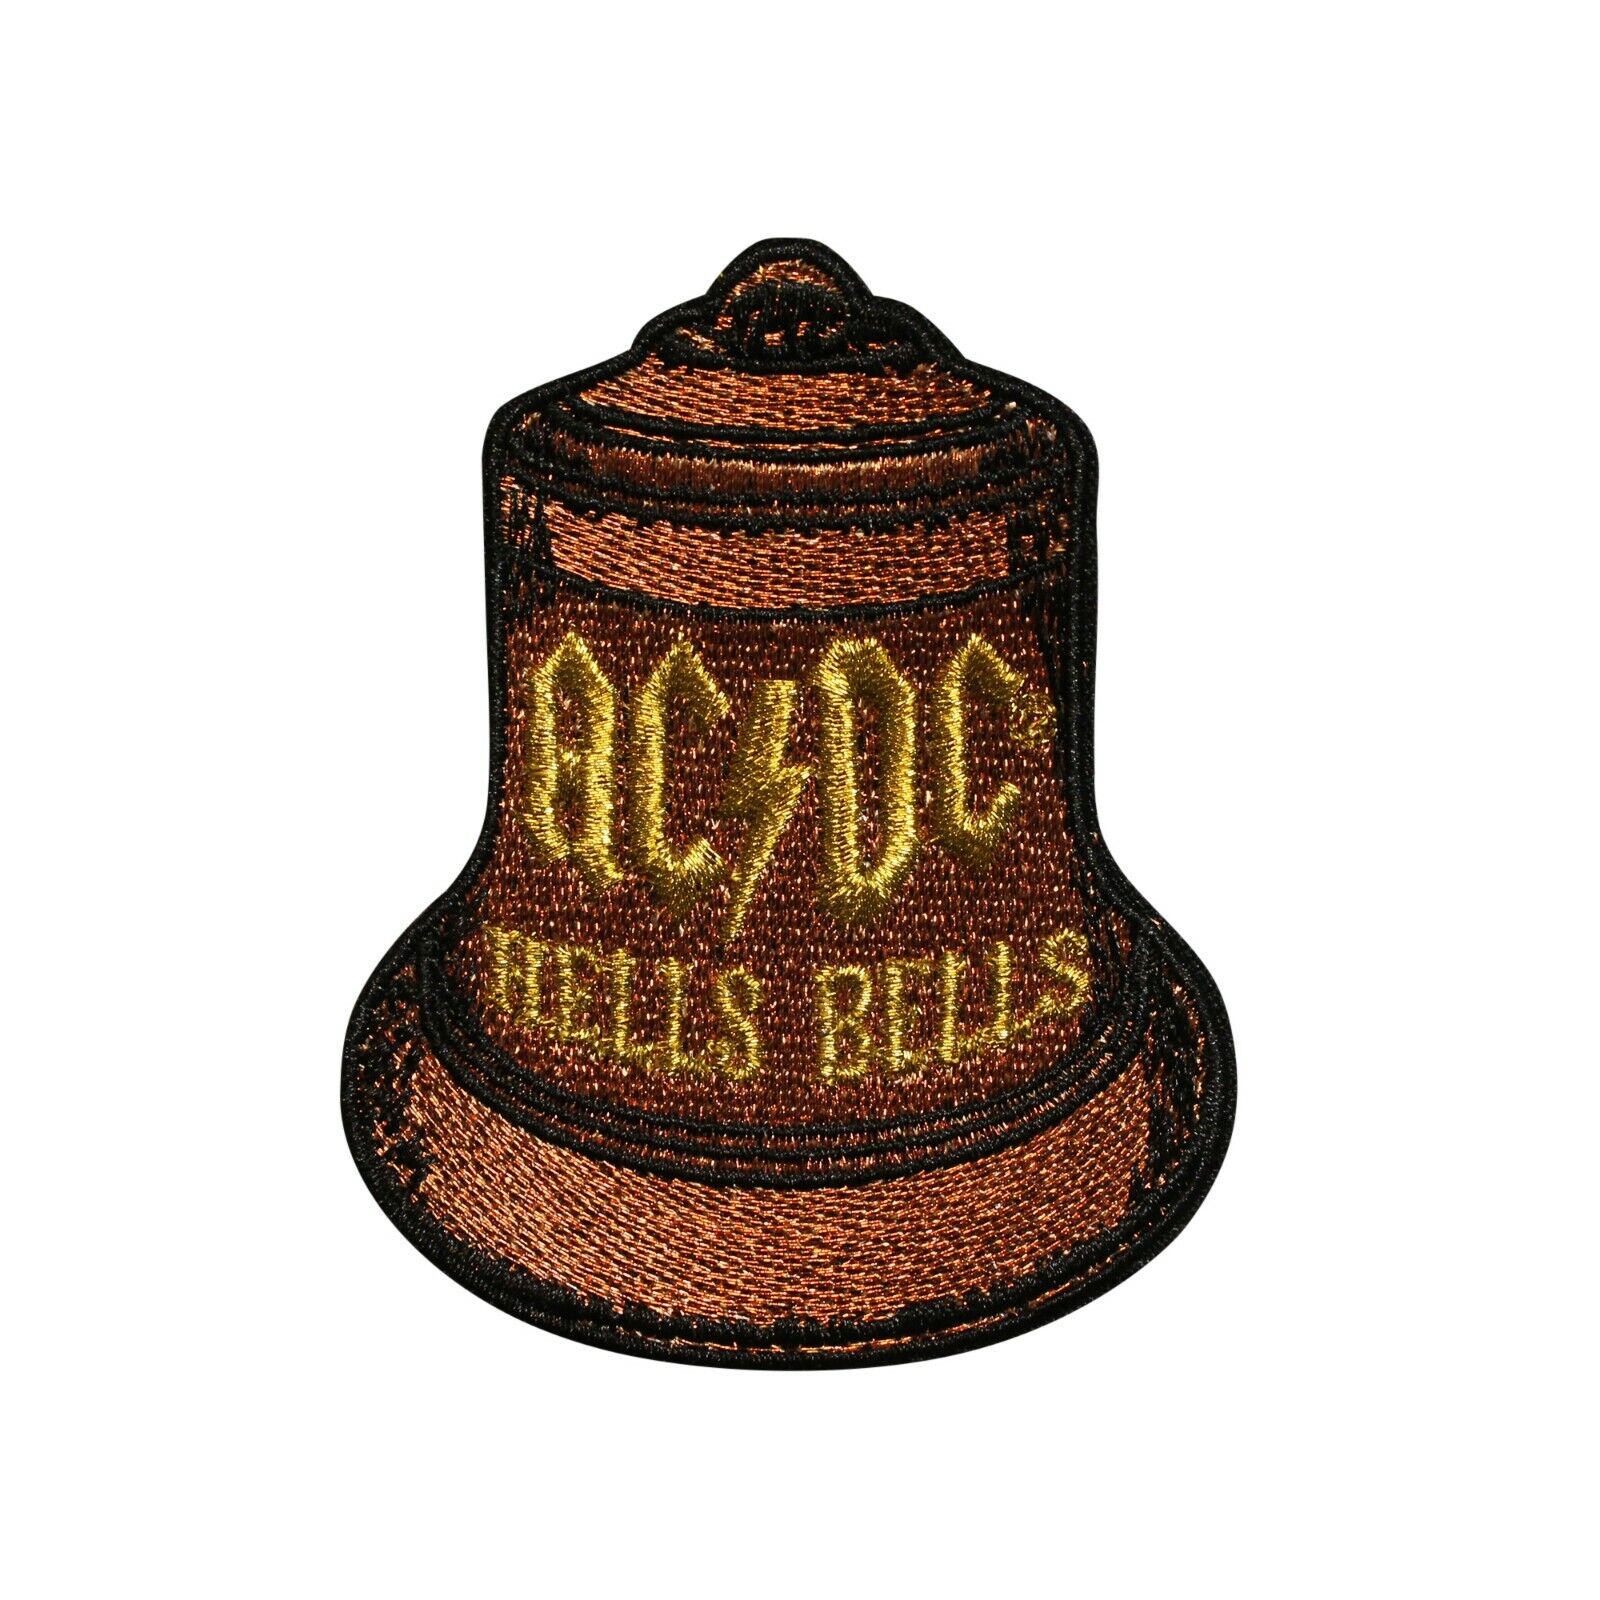 Ac/dc Hells Bells Embroidered Iron On Patch - Licensed 078-o